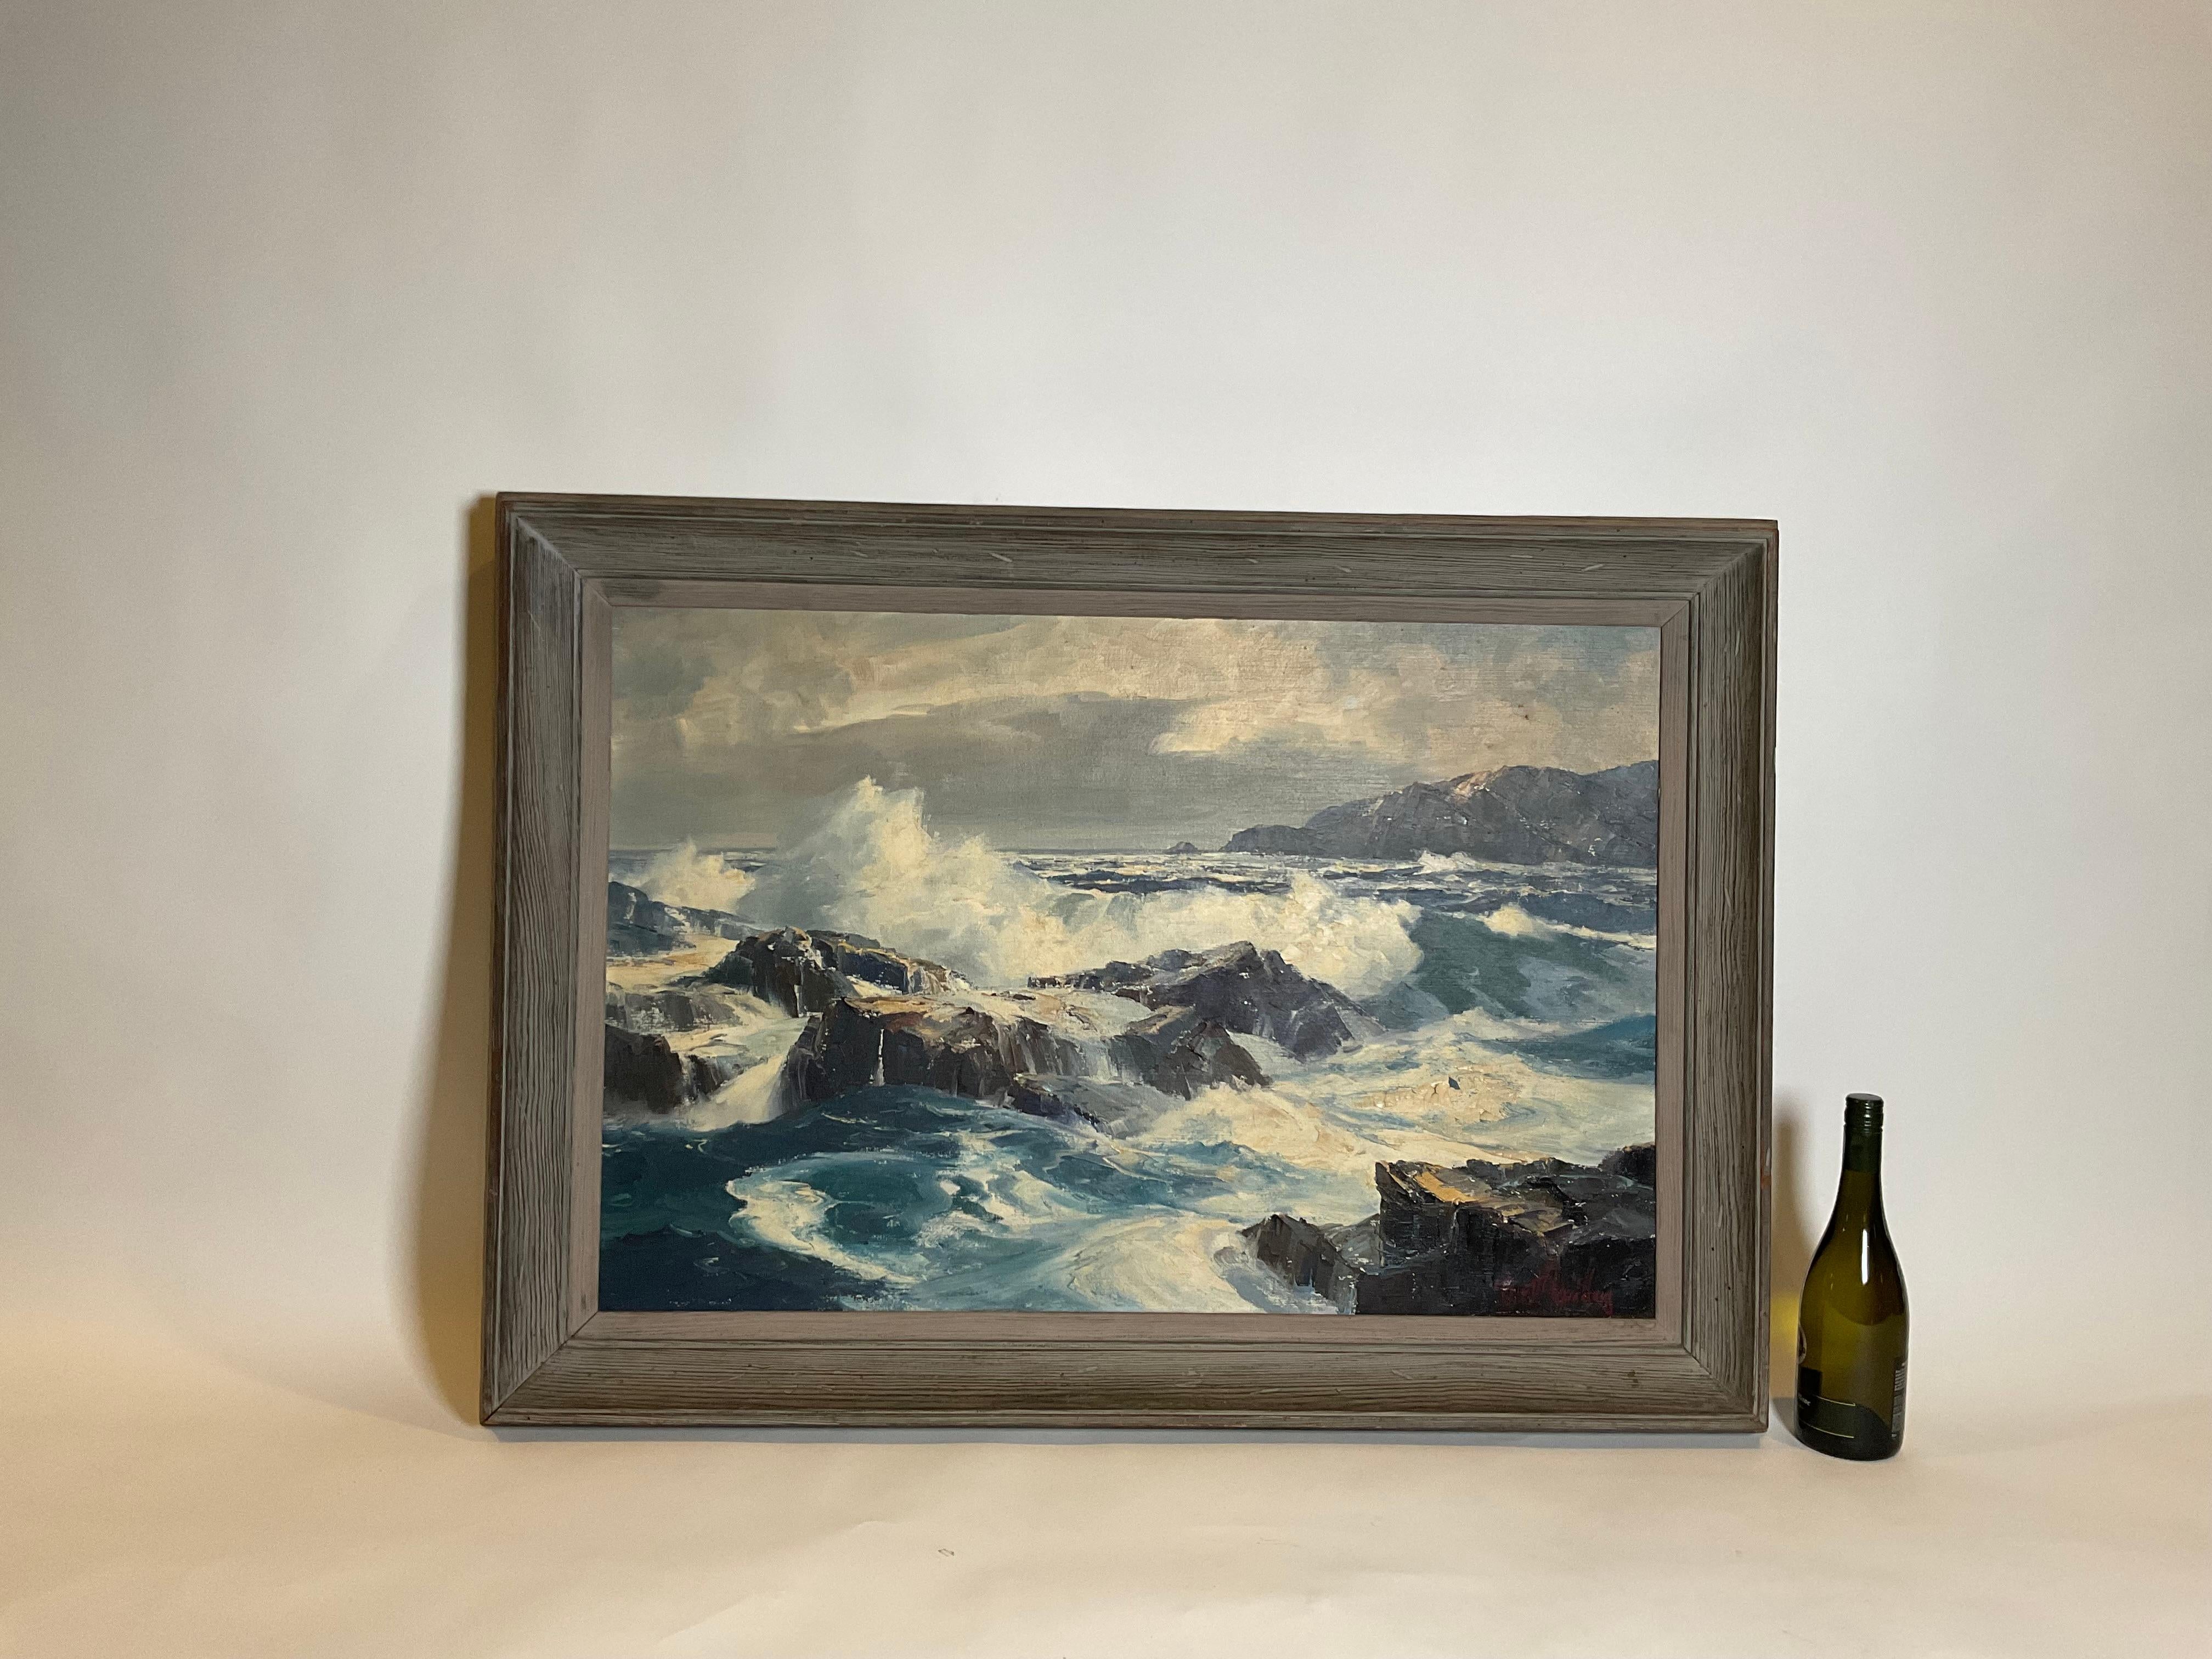 Storm Brewing Oil Painting. Seascape by Bennet Bradbury. Born 1914 Wrentham MA. Died Carmel California 1991/ From a musical family, mother Elfrida Scroder opera star of Boston Opera Company. At age 15 he won a scholarship to Boston Museum of Fine